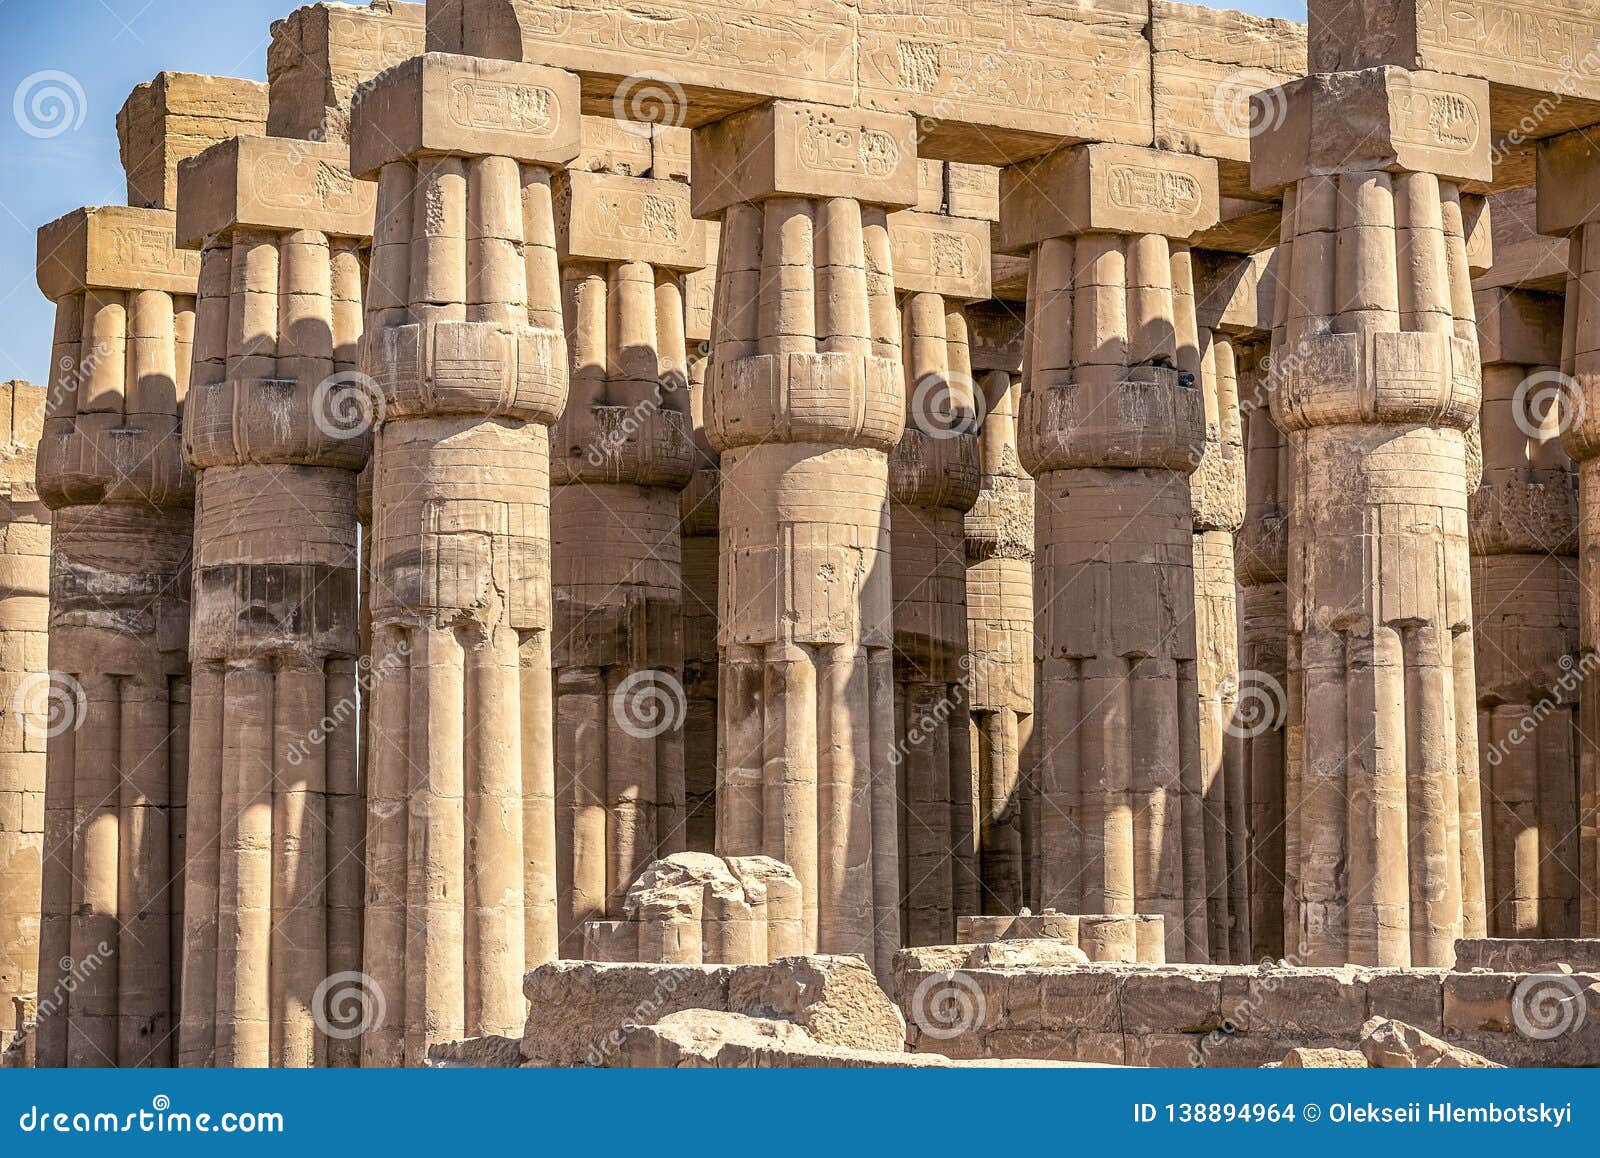 Columns Of The Ancient Egyptian Temple On The Blue Sky Background Stock Photo Image Of Building Columns